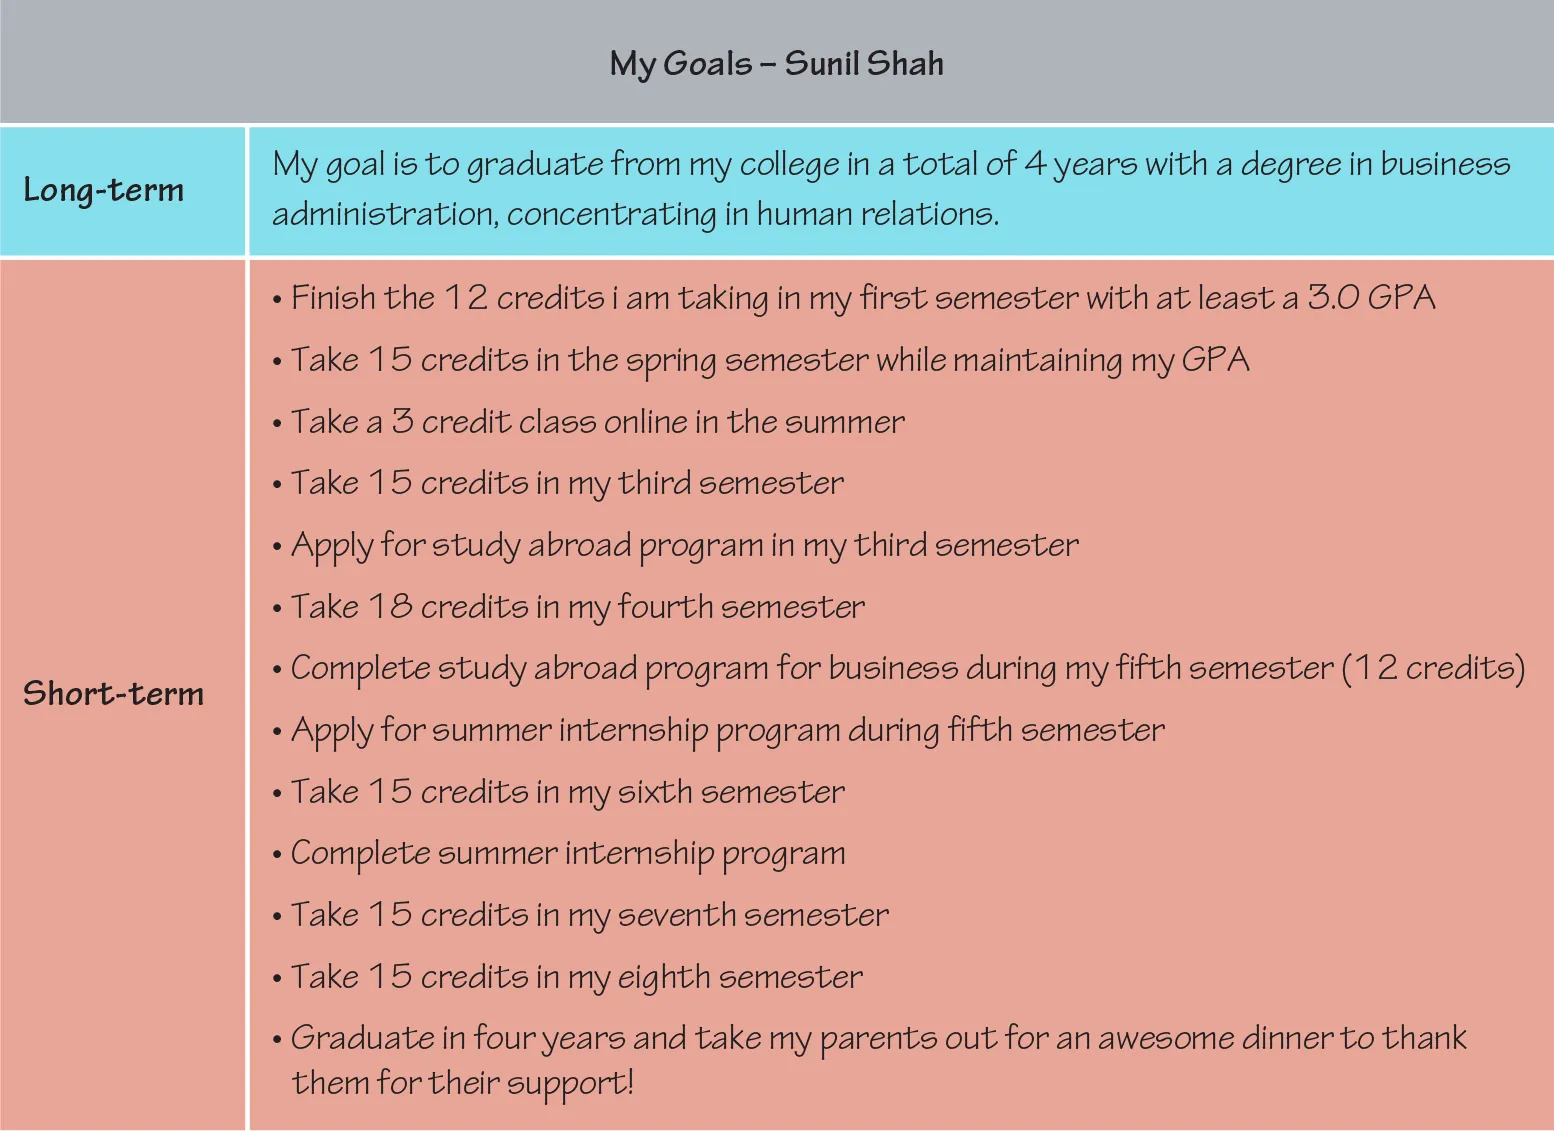 An image shows a list of long-term and short-term goals drafted by Sunil Shah.